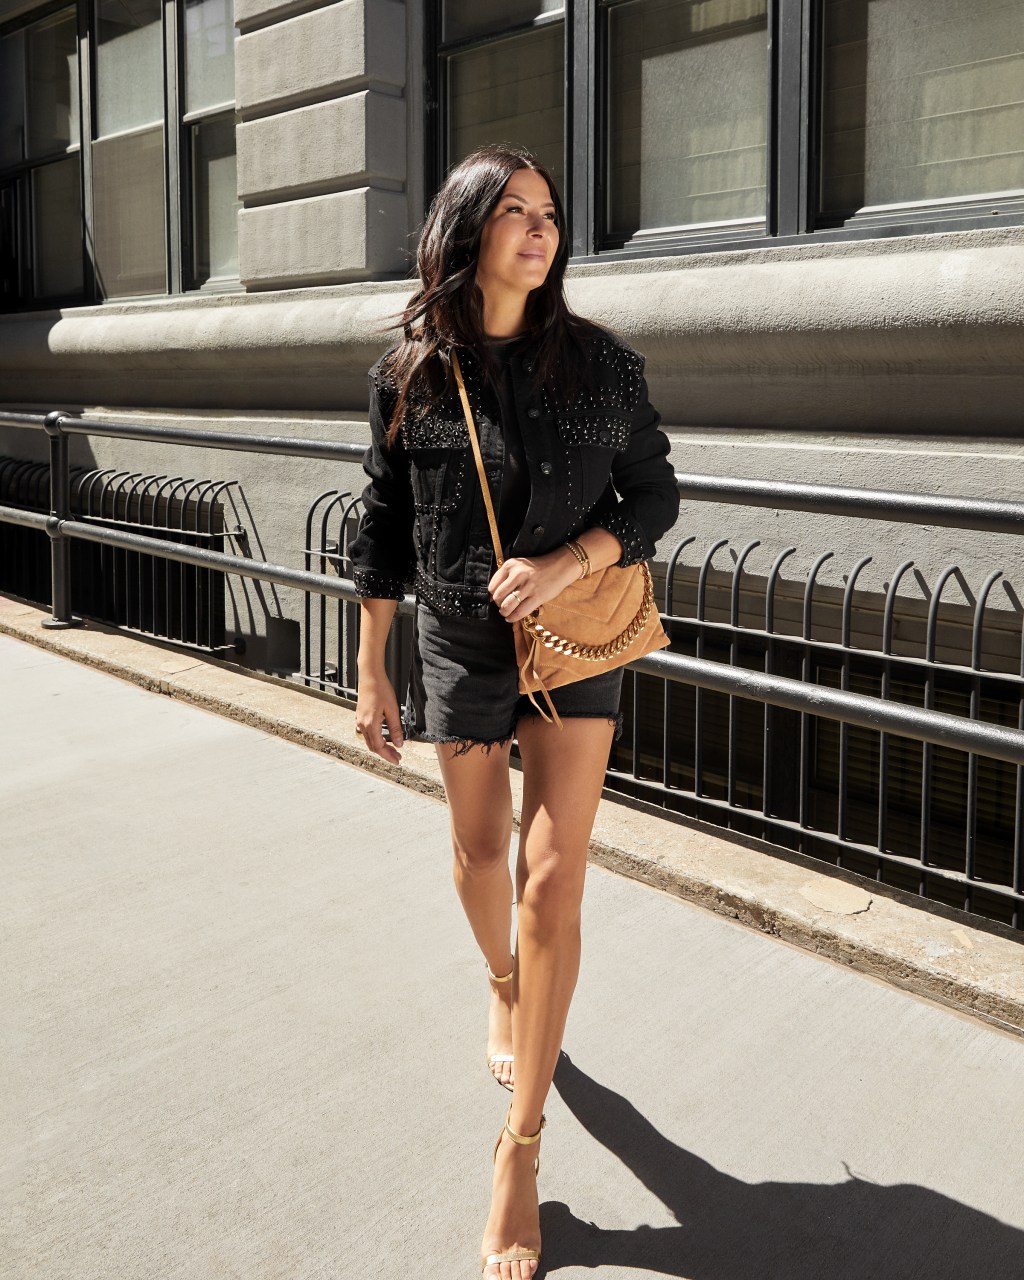 rebecca-minkoff-on-her-new-stone-line-and-navigating-fashion’s-social-media hierarchy